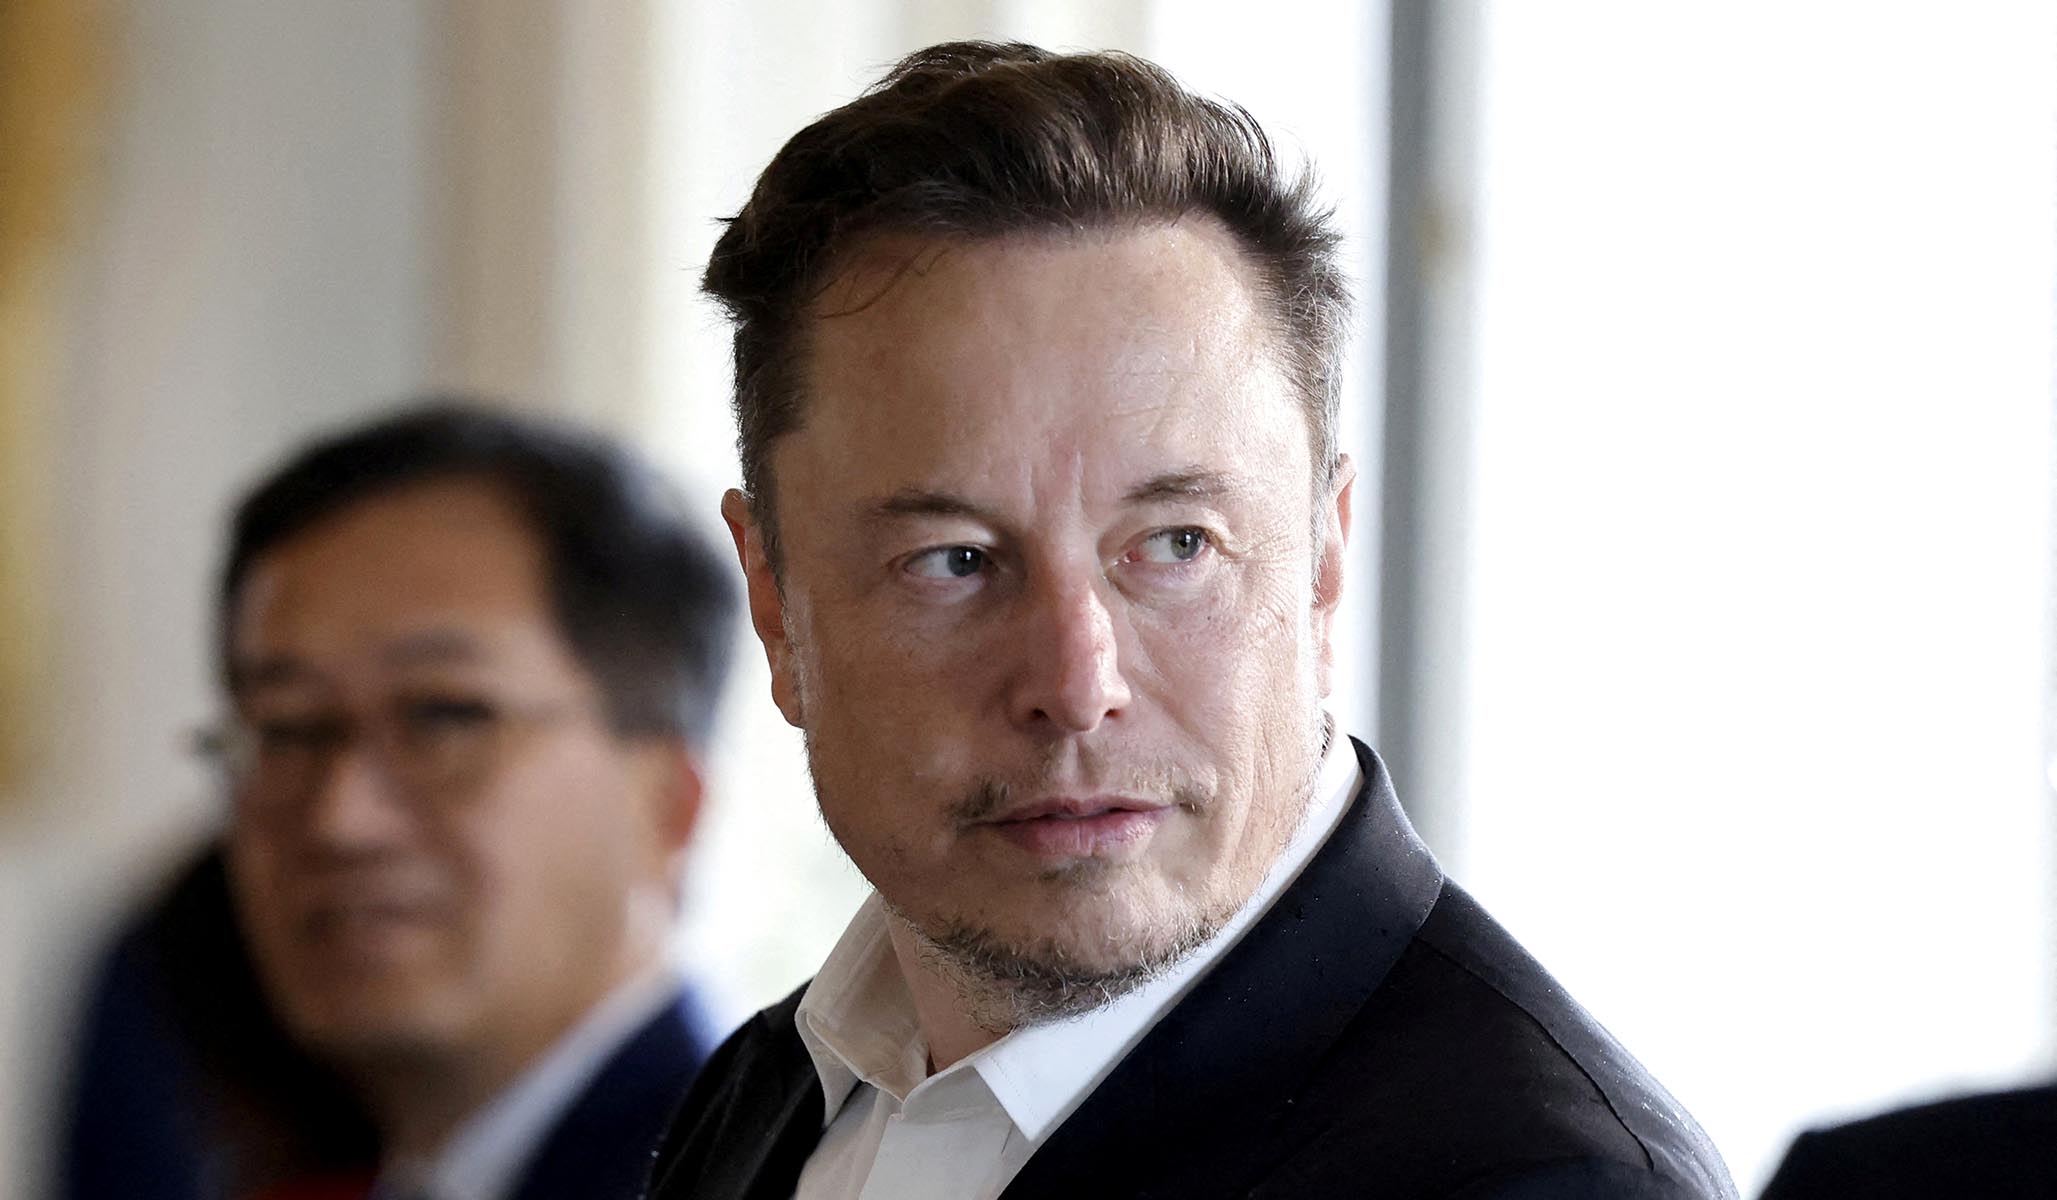 ‘Conjoined Twins’: Beijing Claims Elon Musk Backs Continued U.S.-China Codependence